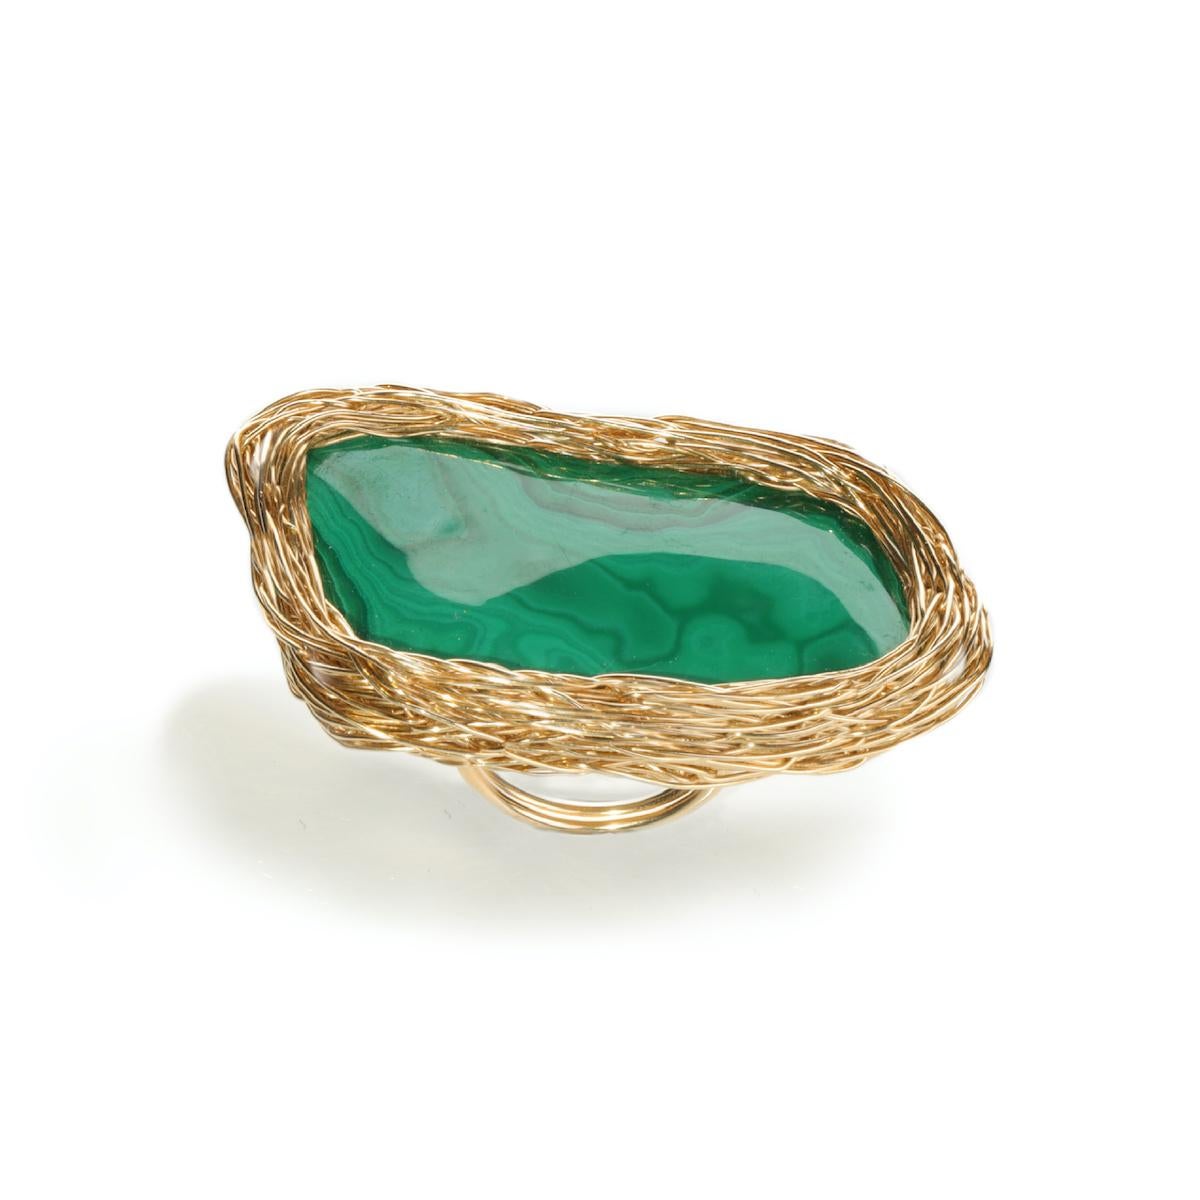 Malachite Statement Cocktail Ring 14 K in Yellow Gold F. by the Artist herself For Sale 3